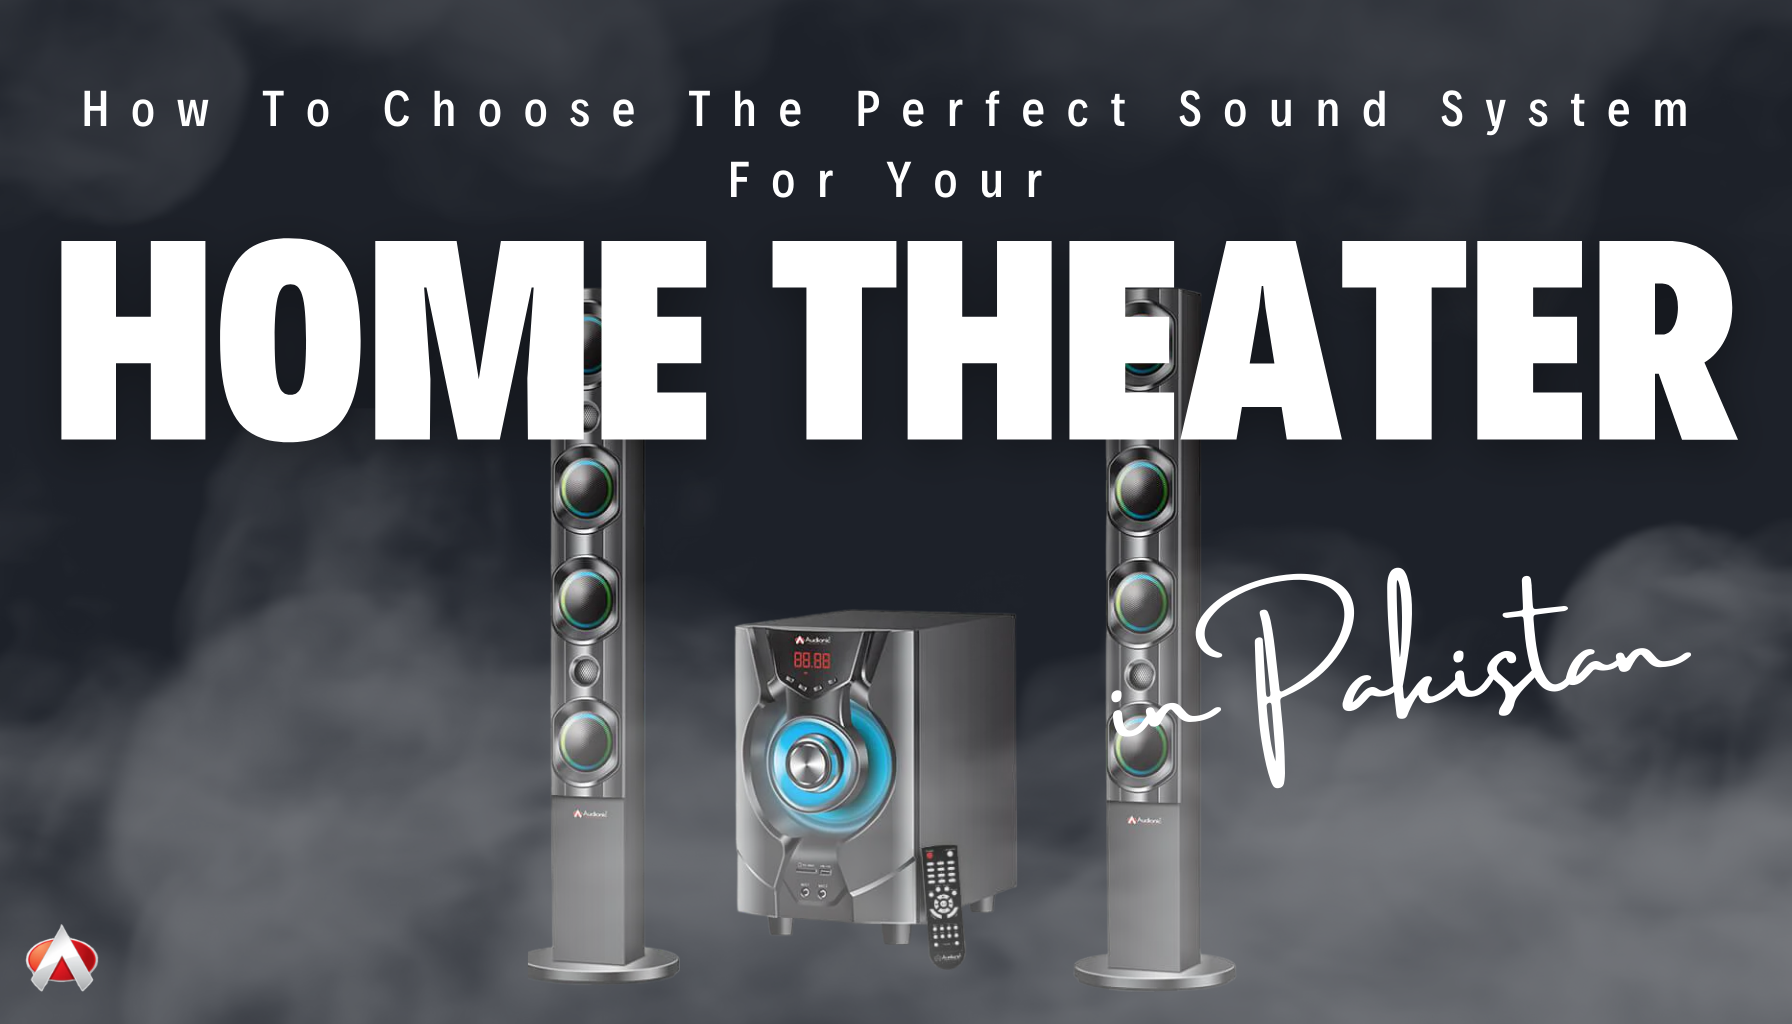 How to Choose the Perfect Sound System for Your Home Theater in Pakistan